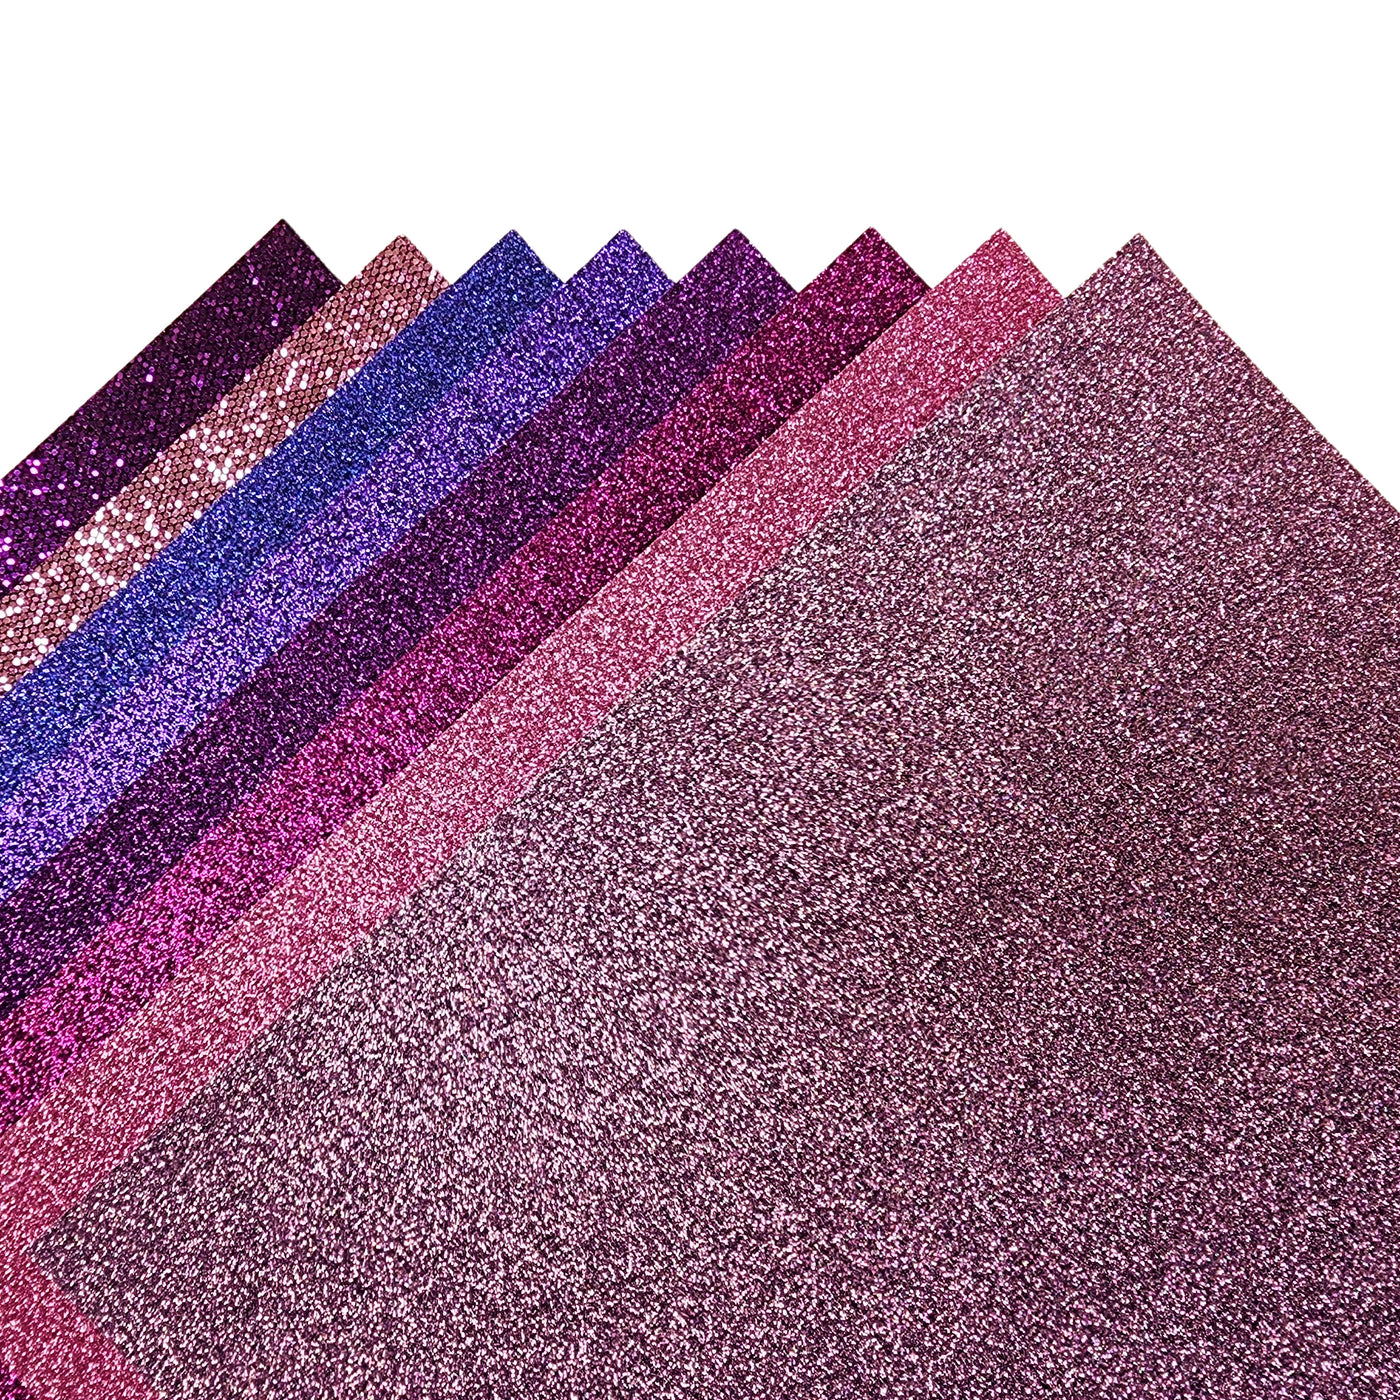 PURPLE PASSION GLITTER CARDSTOCK VARIETY PACK - 16 Sheets - Encore